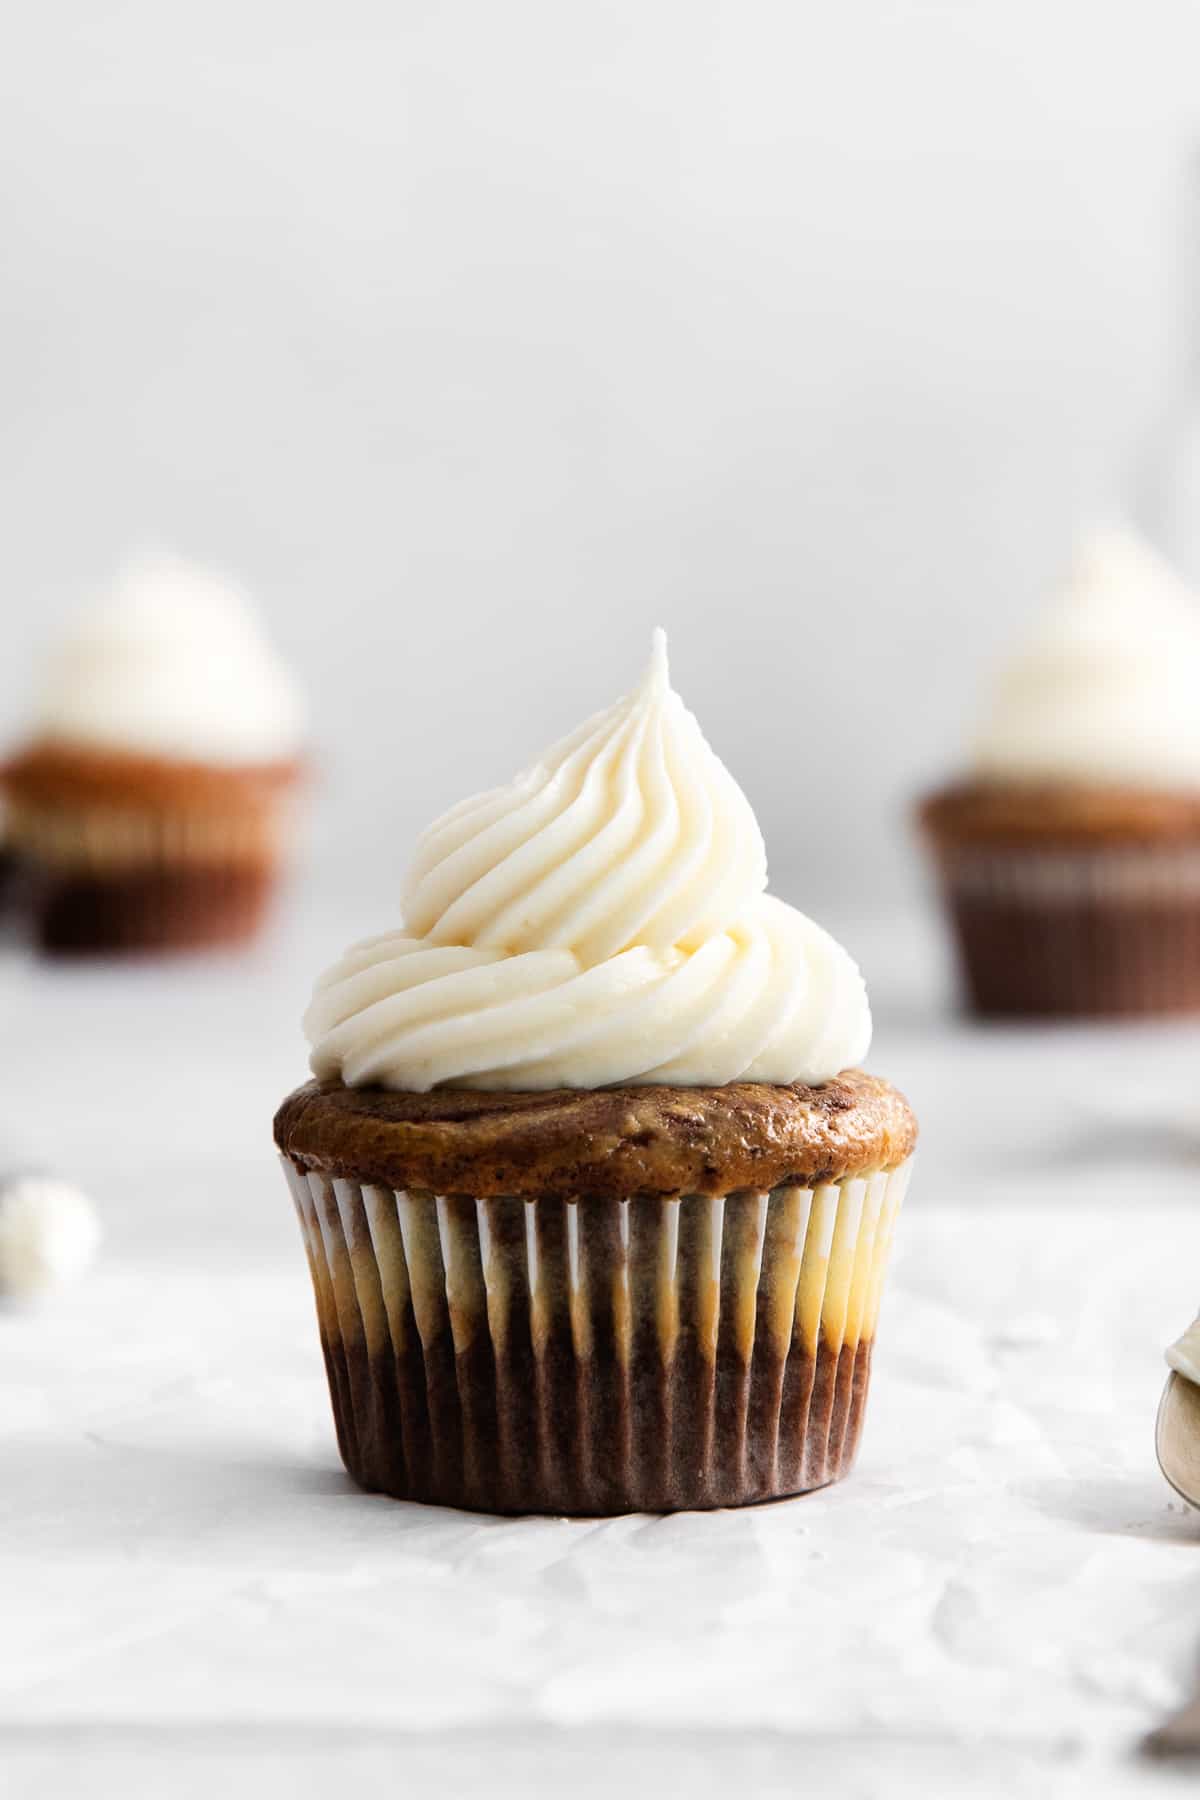 Cream cheese buttercream frosting on a cupcake.